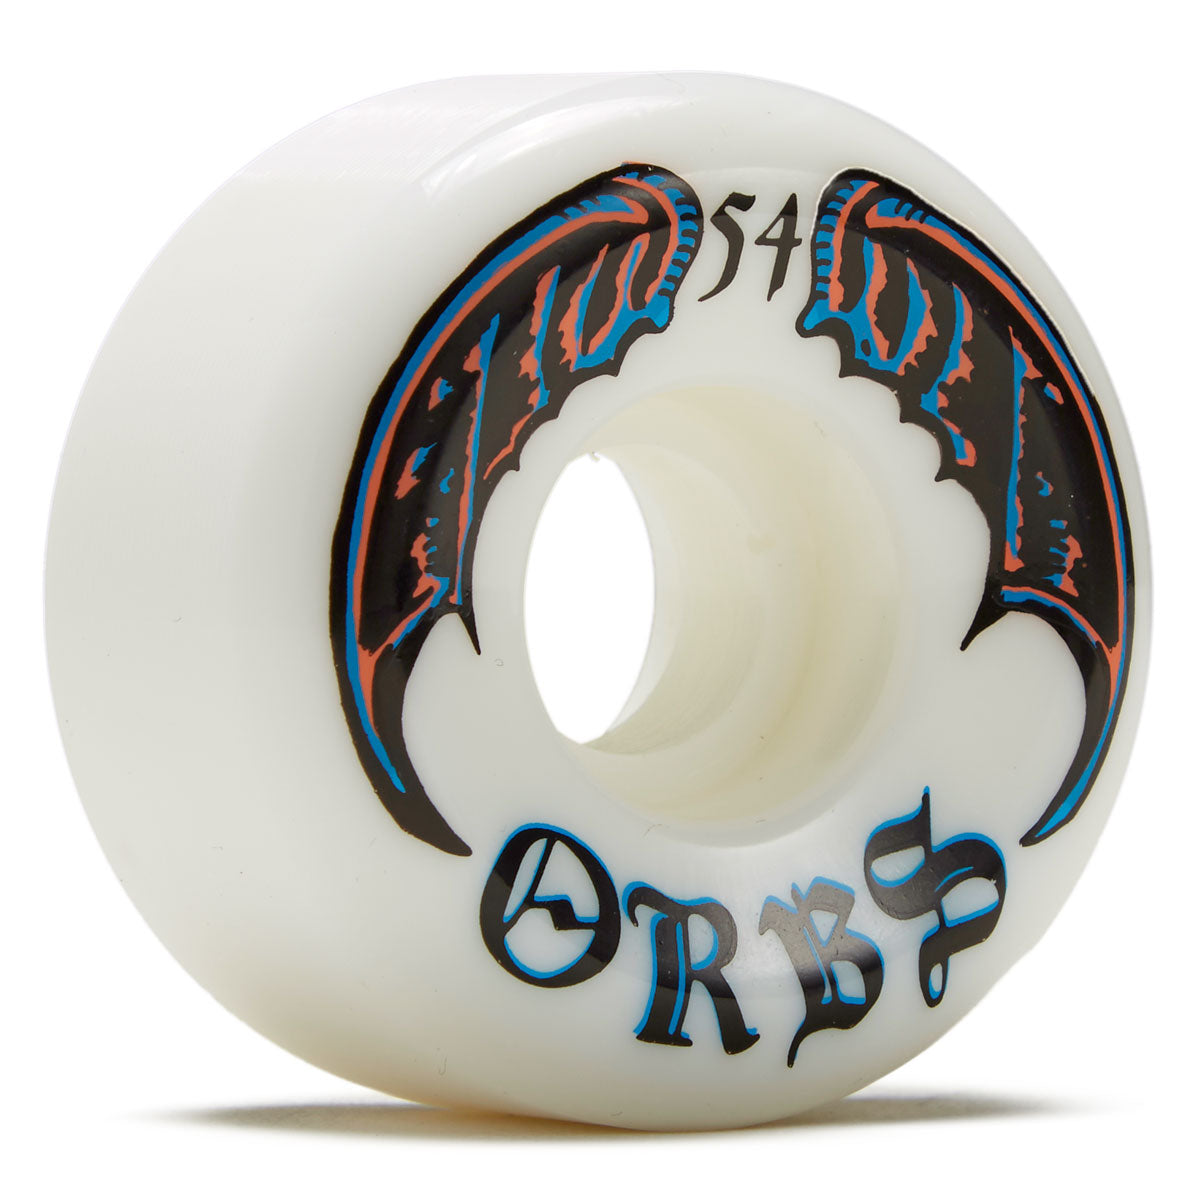 Welcome Orbs Specters Conical 99A Skateboard Wheels - White - 54mm image 1